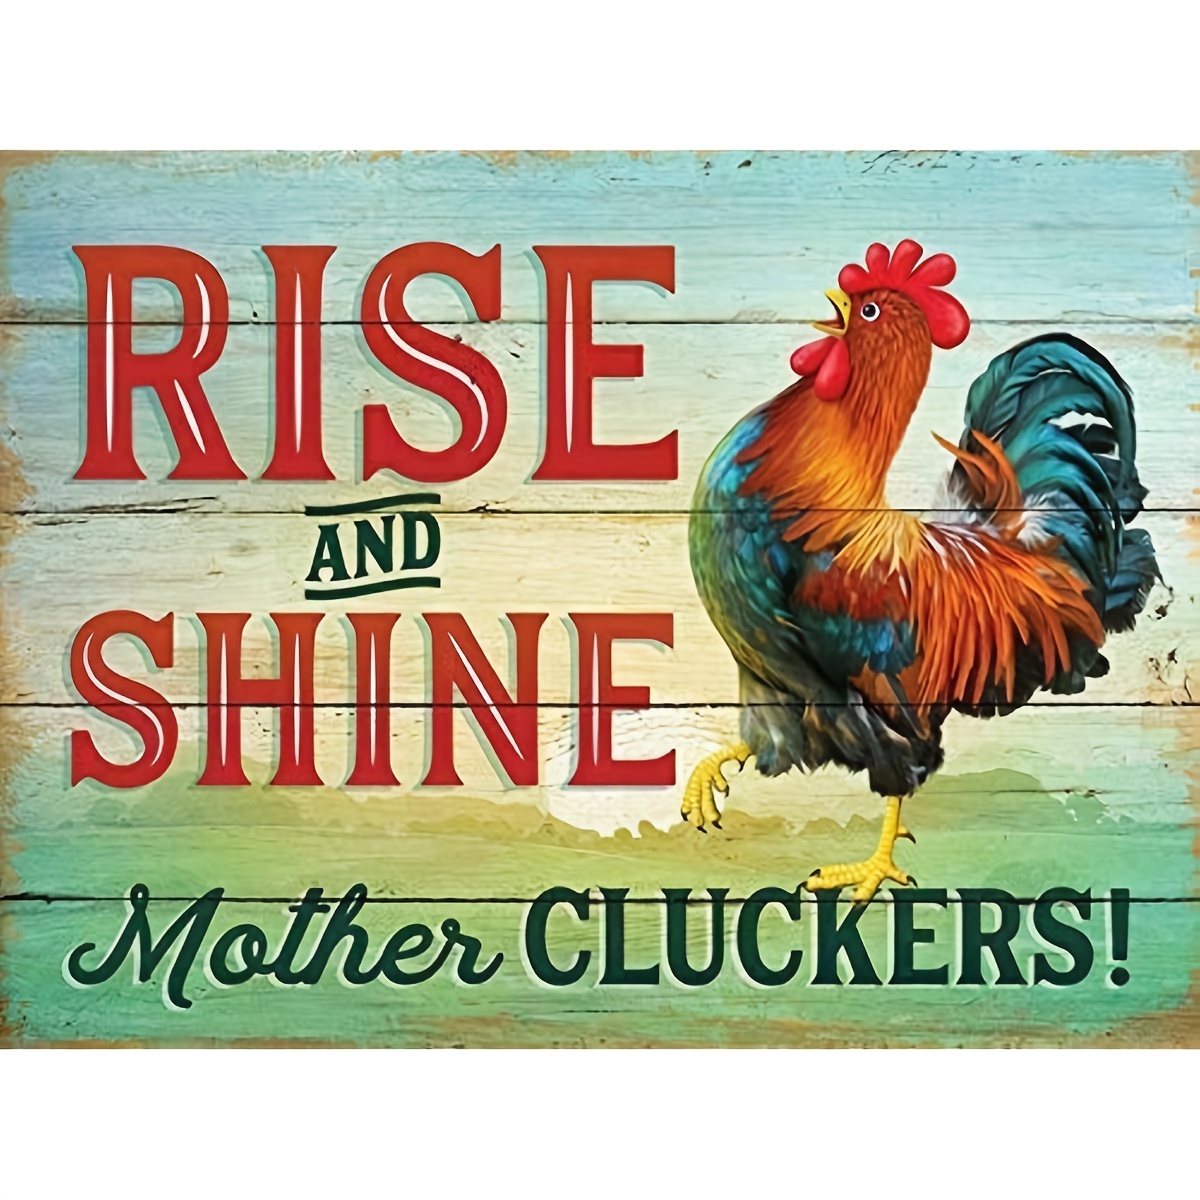 1pc Retro Vintage Rise And Shine Mother Cluckers Chicken Metal Tin Sign Home Bar Cafe Retaurant Wall Decor Signs 12x8 Inch